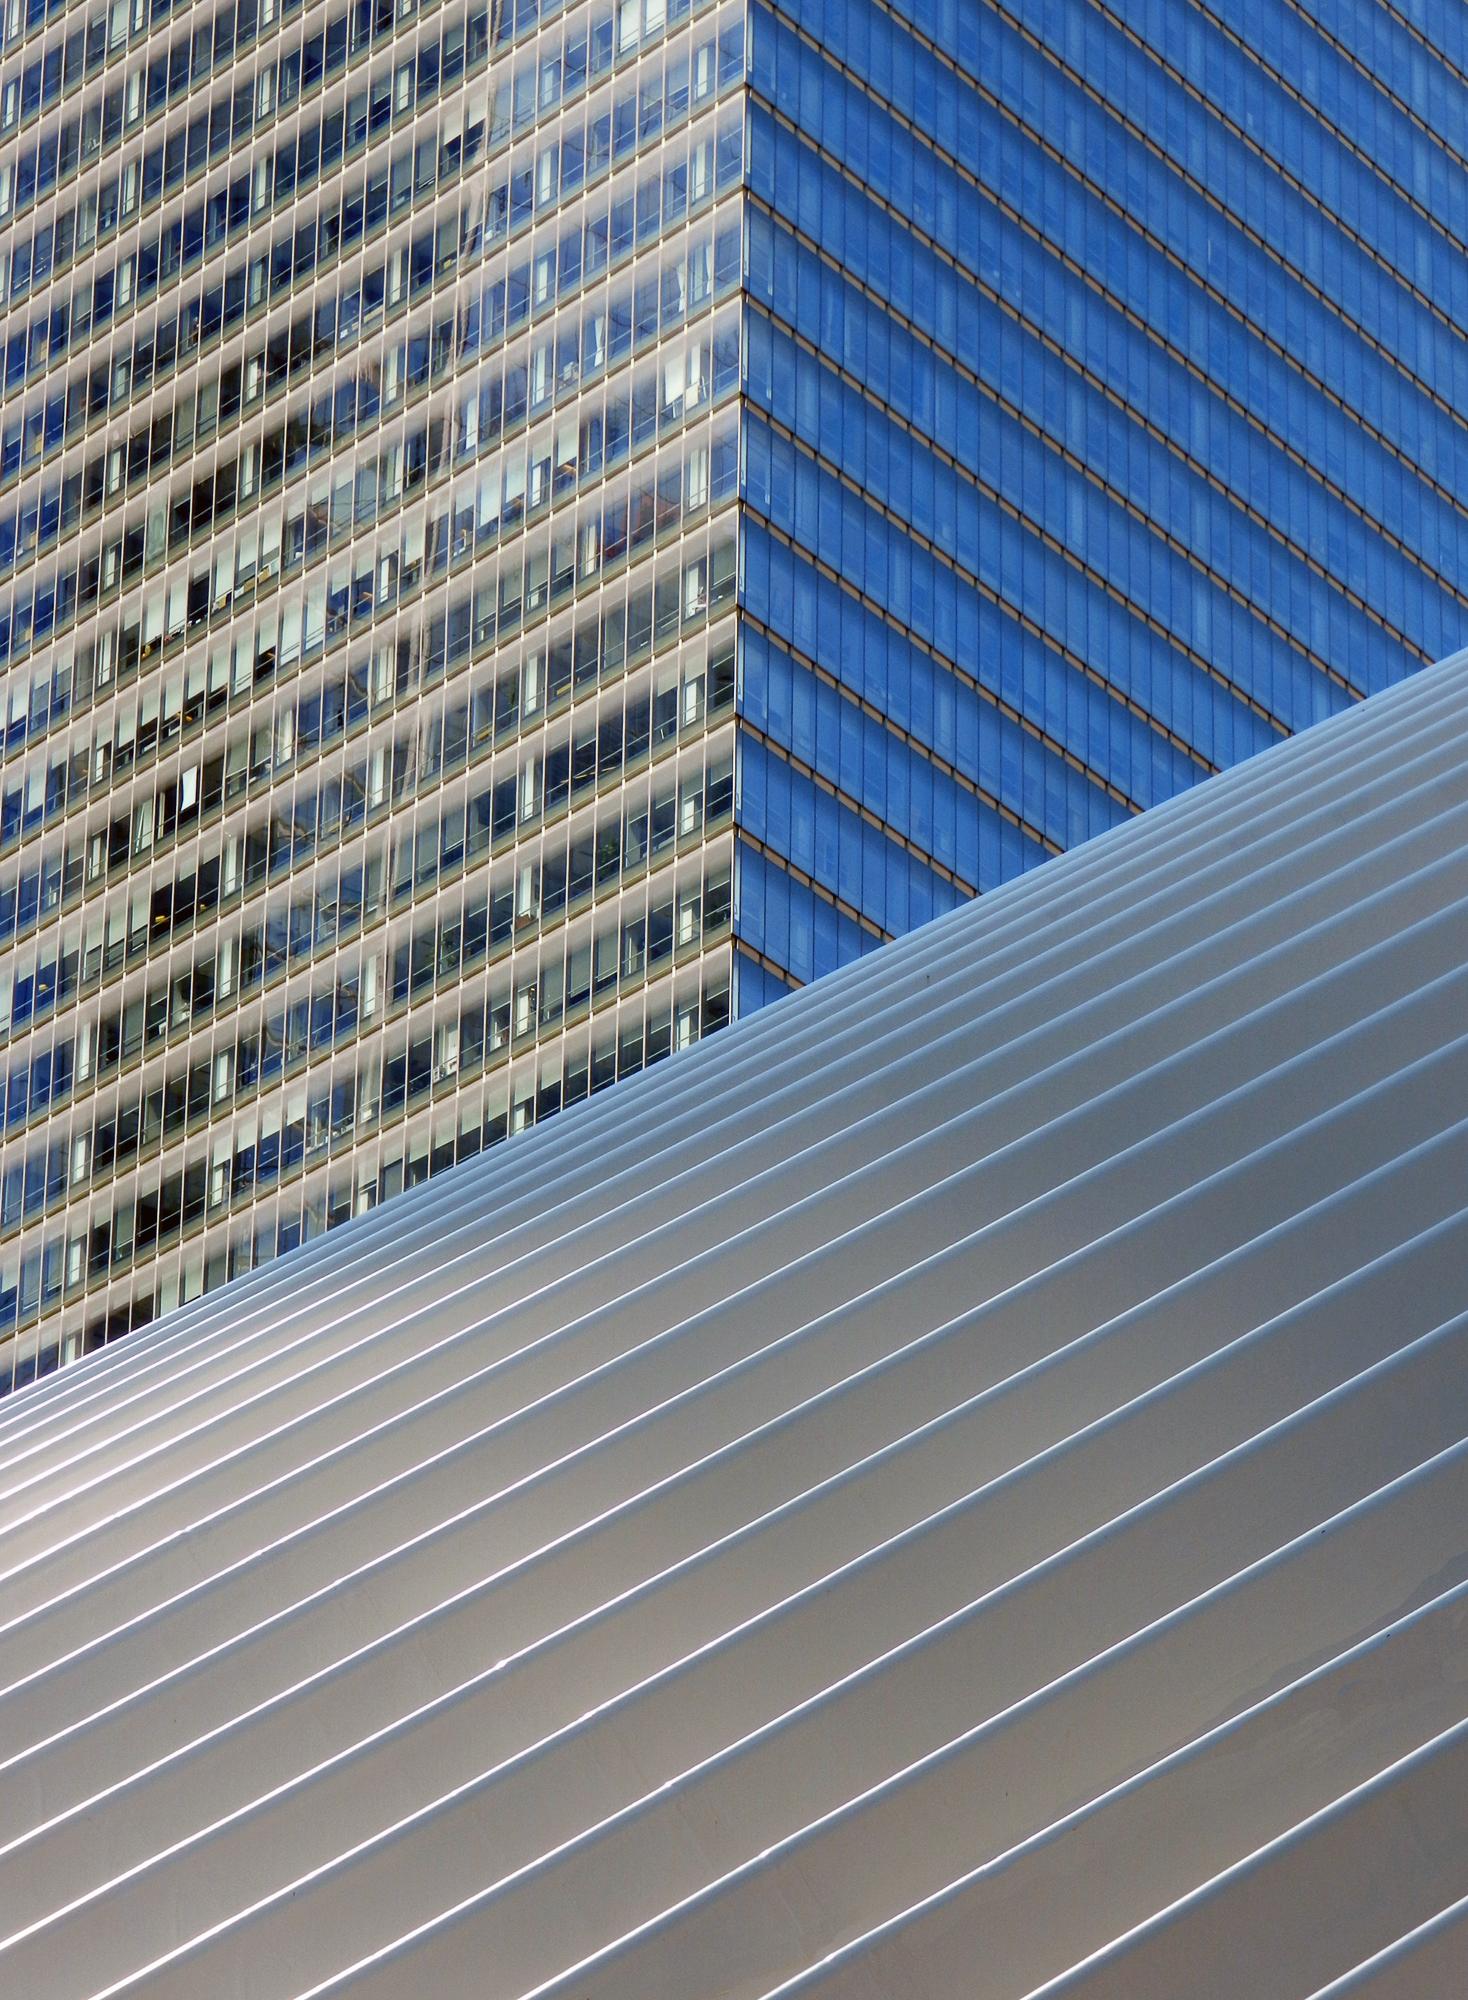 This Photographer’s Shots Of Real Buildings Look Just Like Optical Illusions